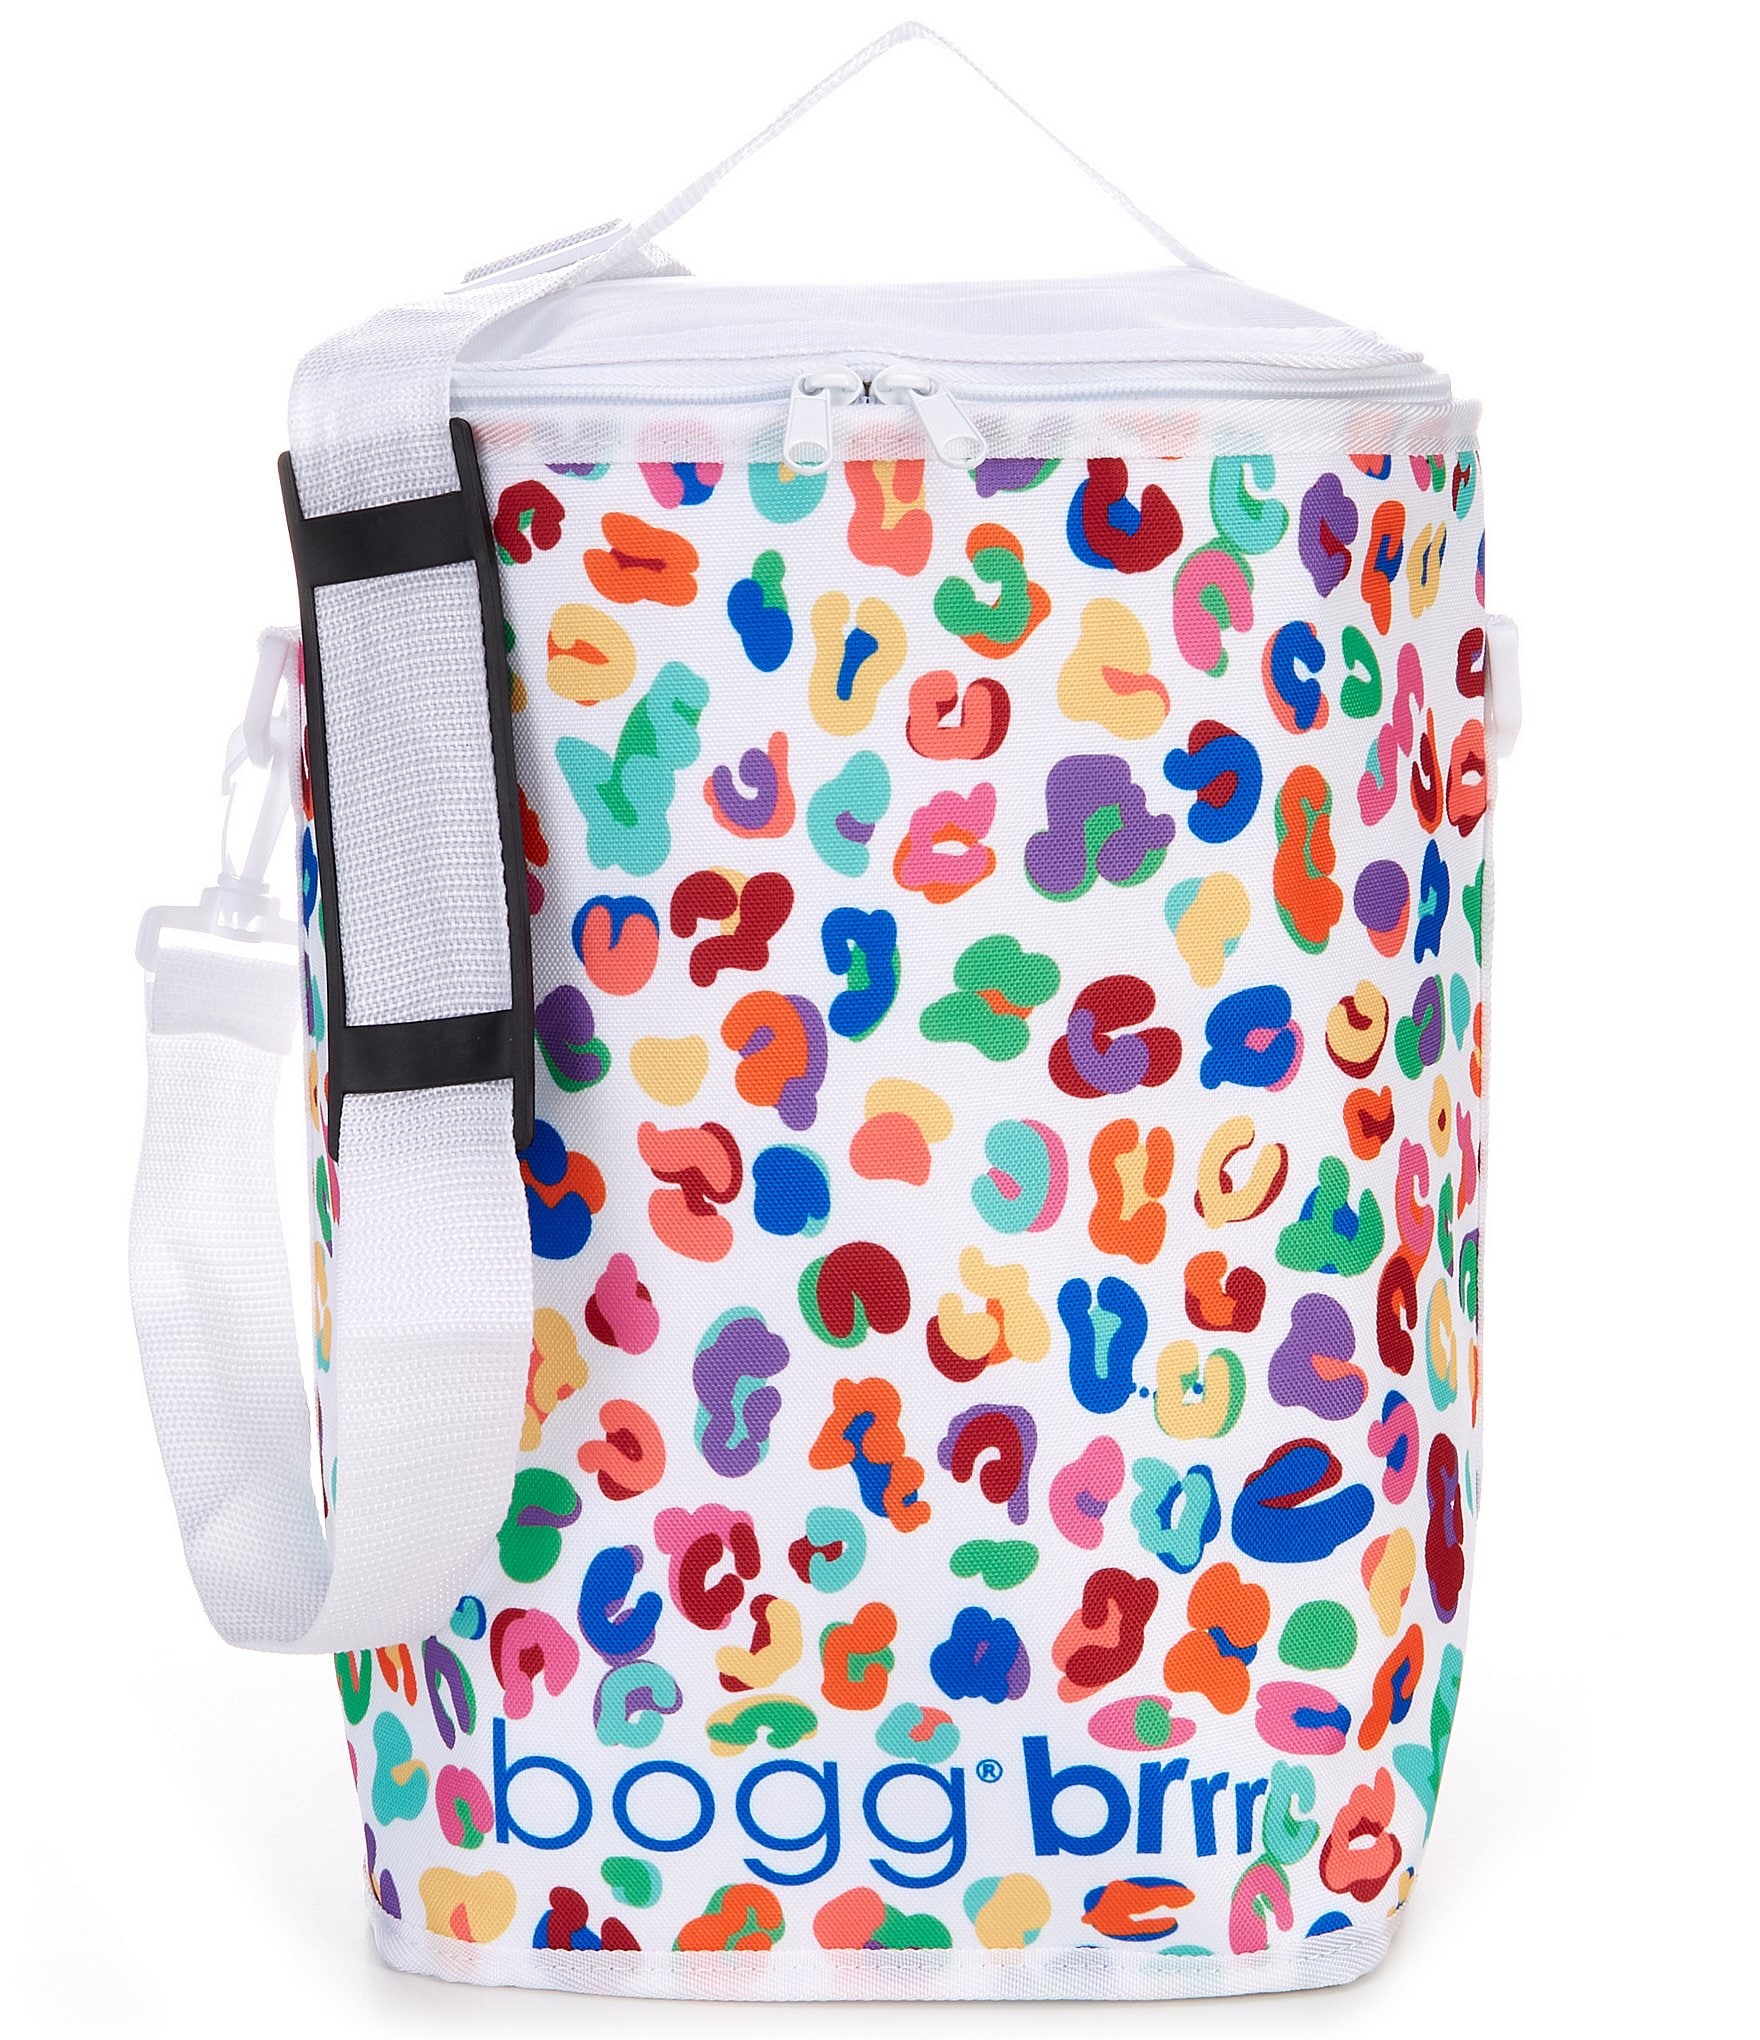 Bogg Bags, Coolers, and Accessories - Her Hide Out